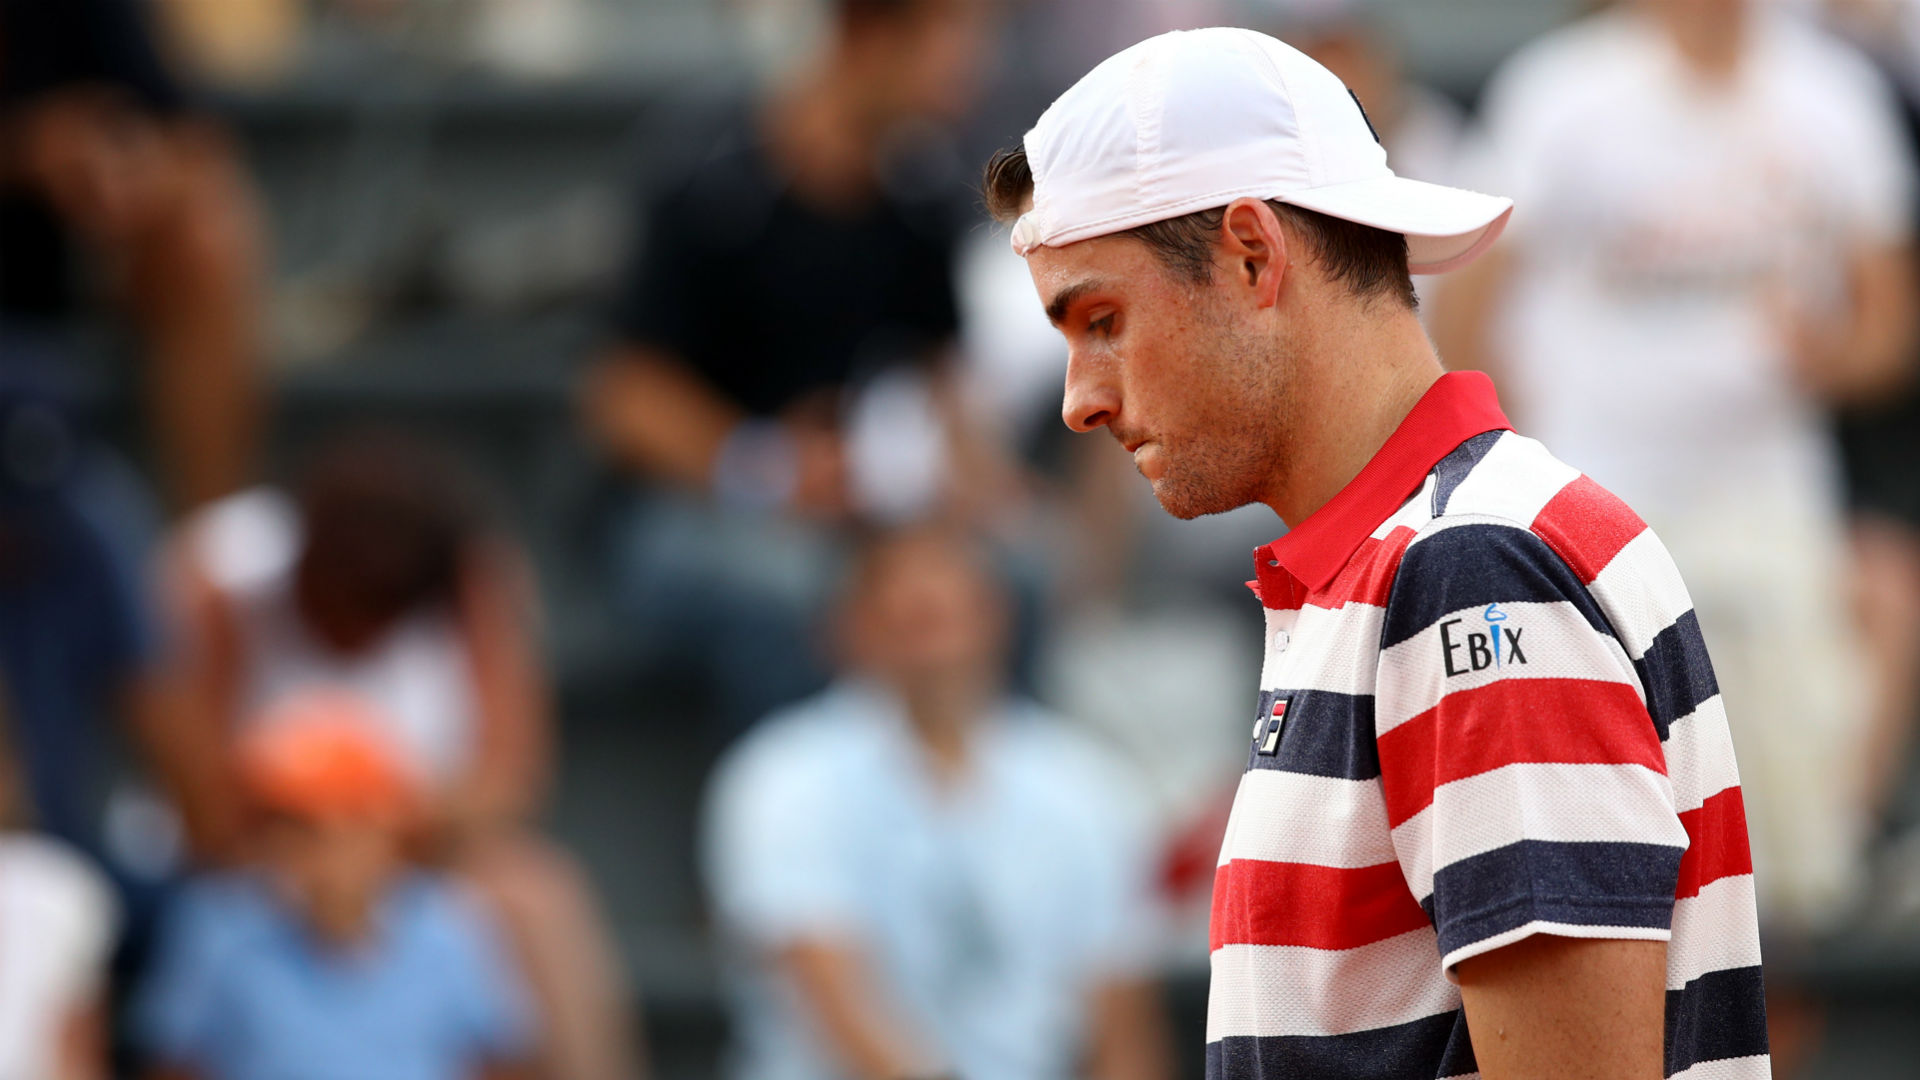 A foot injury will prevent John Isner from competing at the French Open, the American has confirmed.